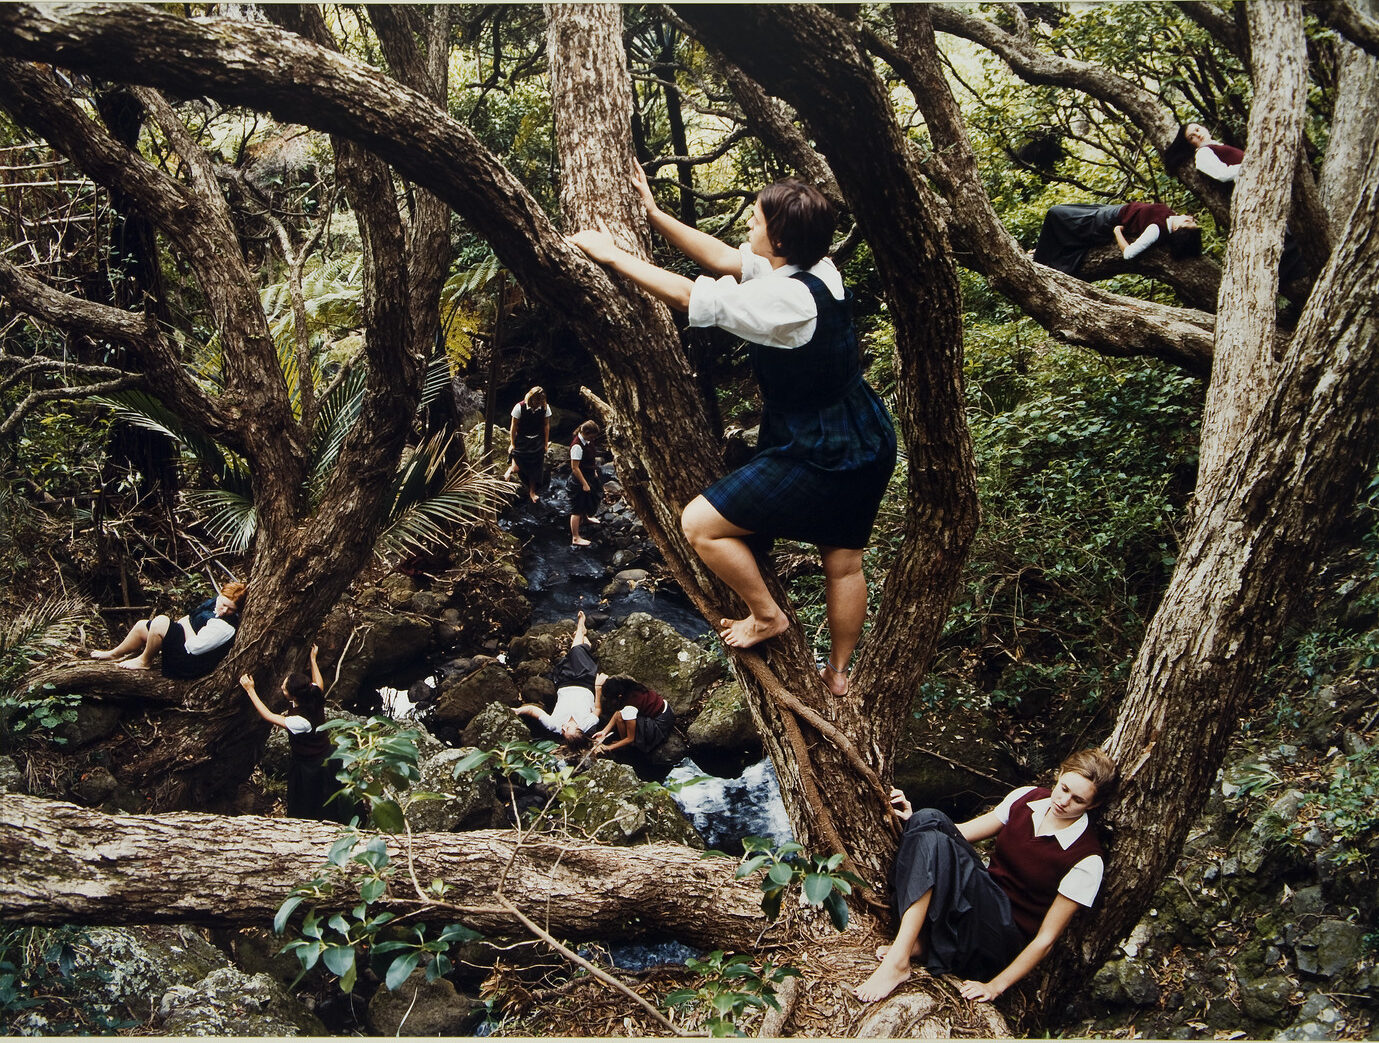 Color photograph of a dense forest with a light skin-toned girl with bare feet climbing a tree at center. Below her to the right is another light skinned girl sitting against the trunk of a tree. Other figures are scattered throughout the forest in the background.